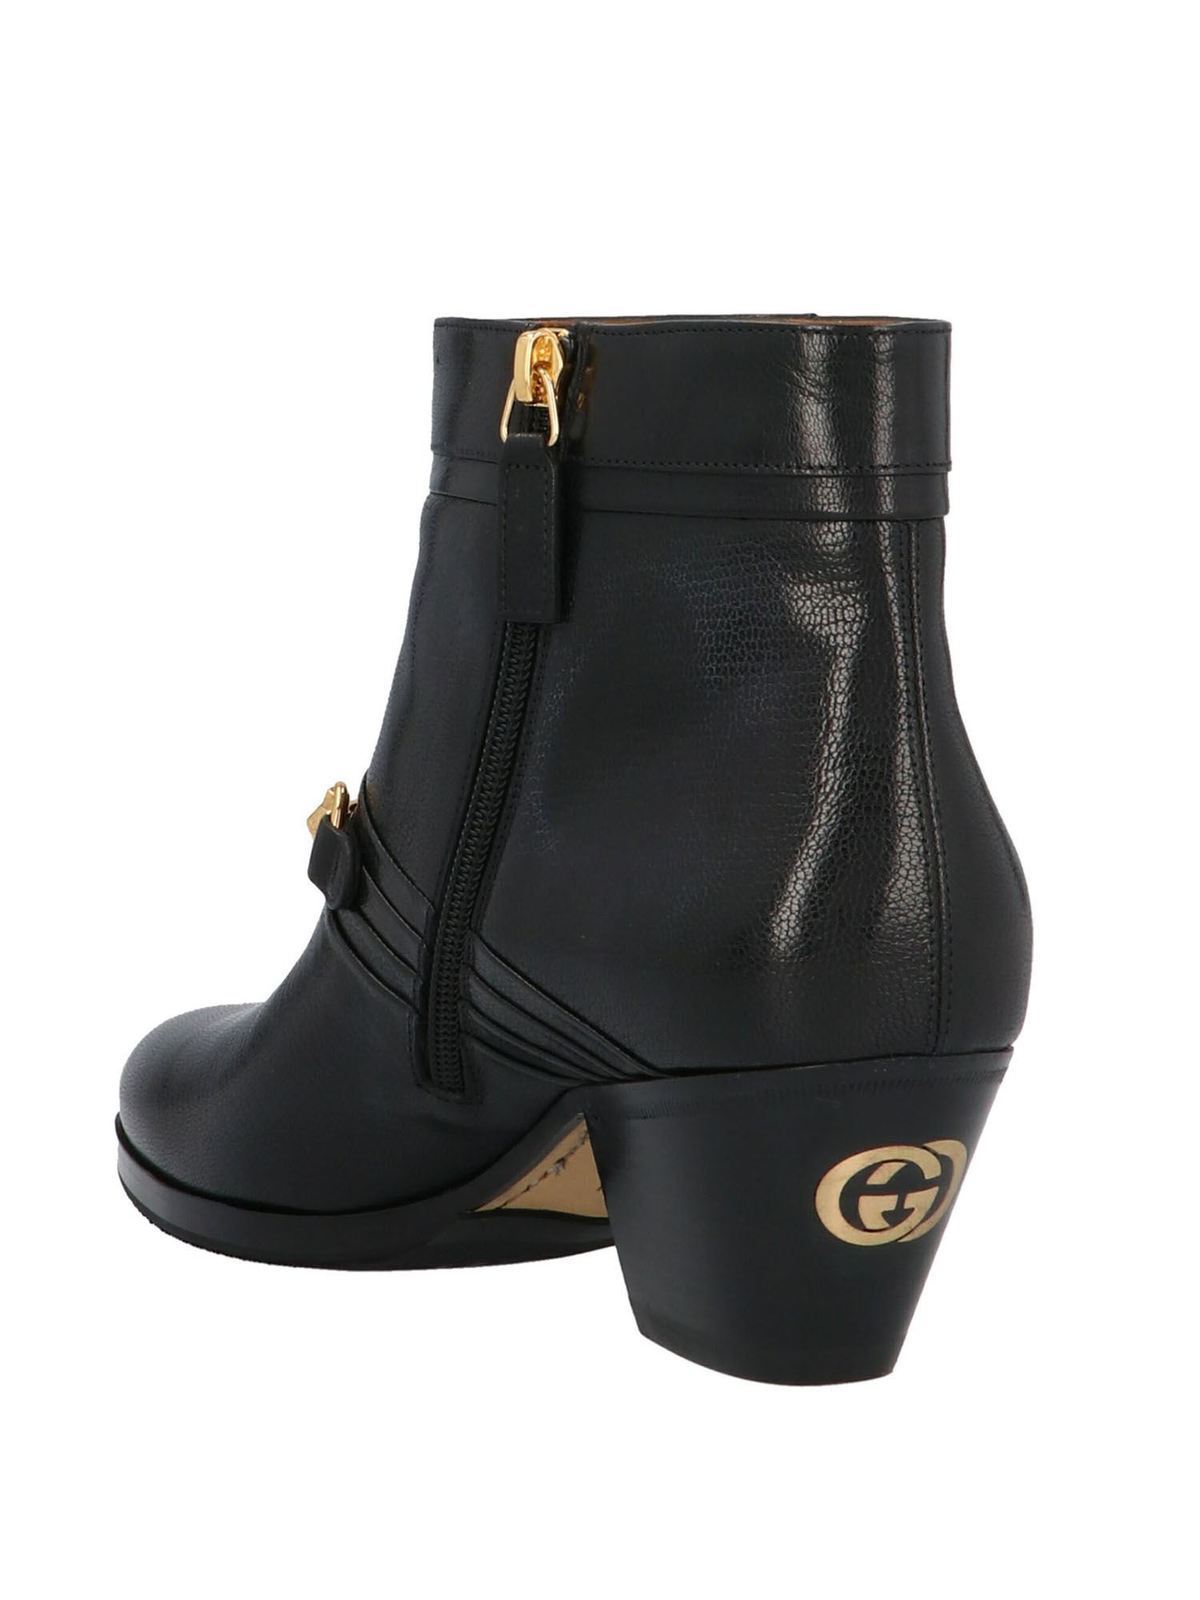 Black leather GG horsebit ankle boots 